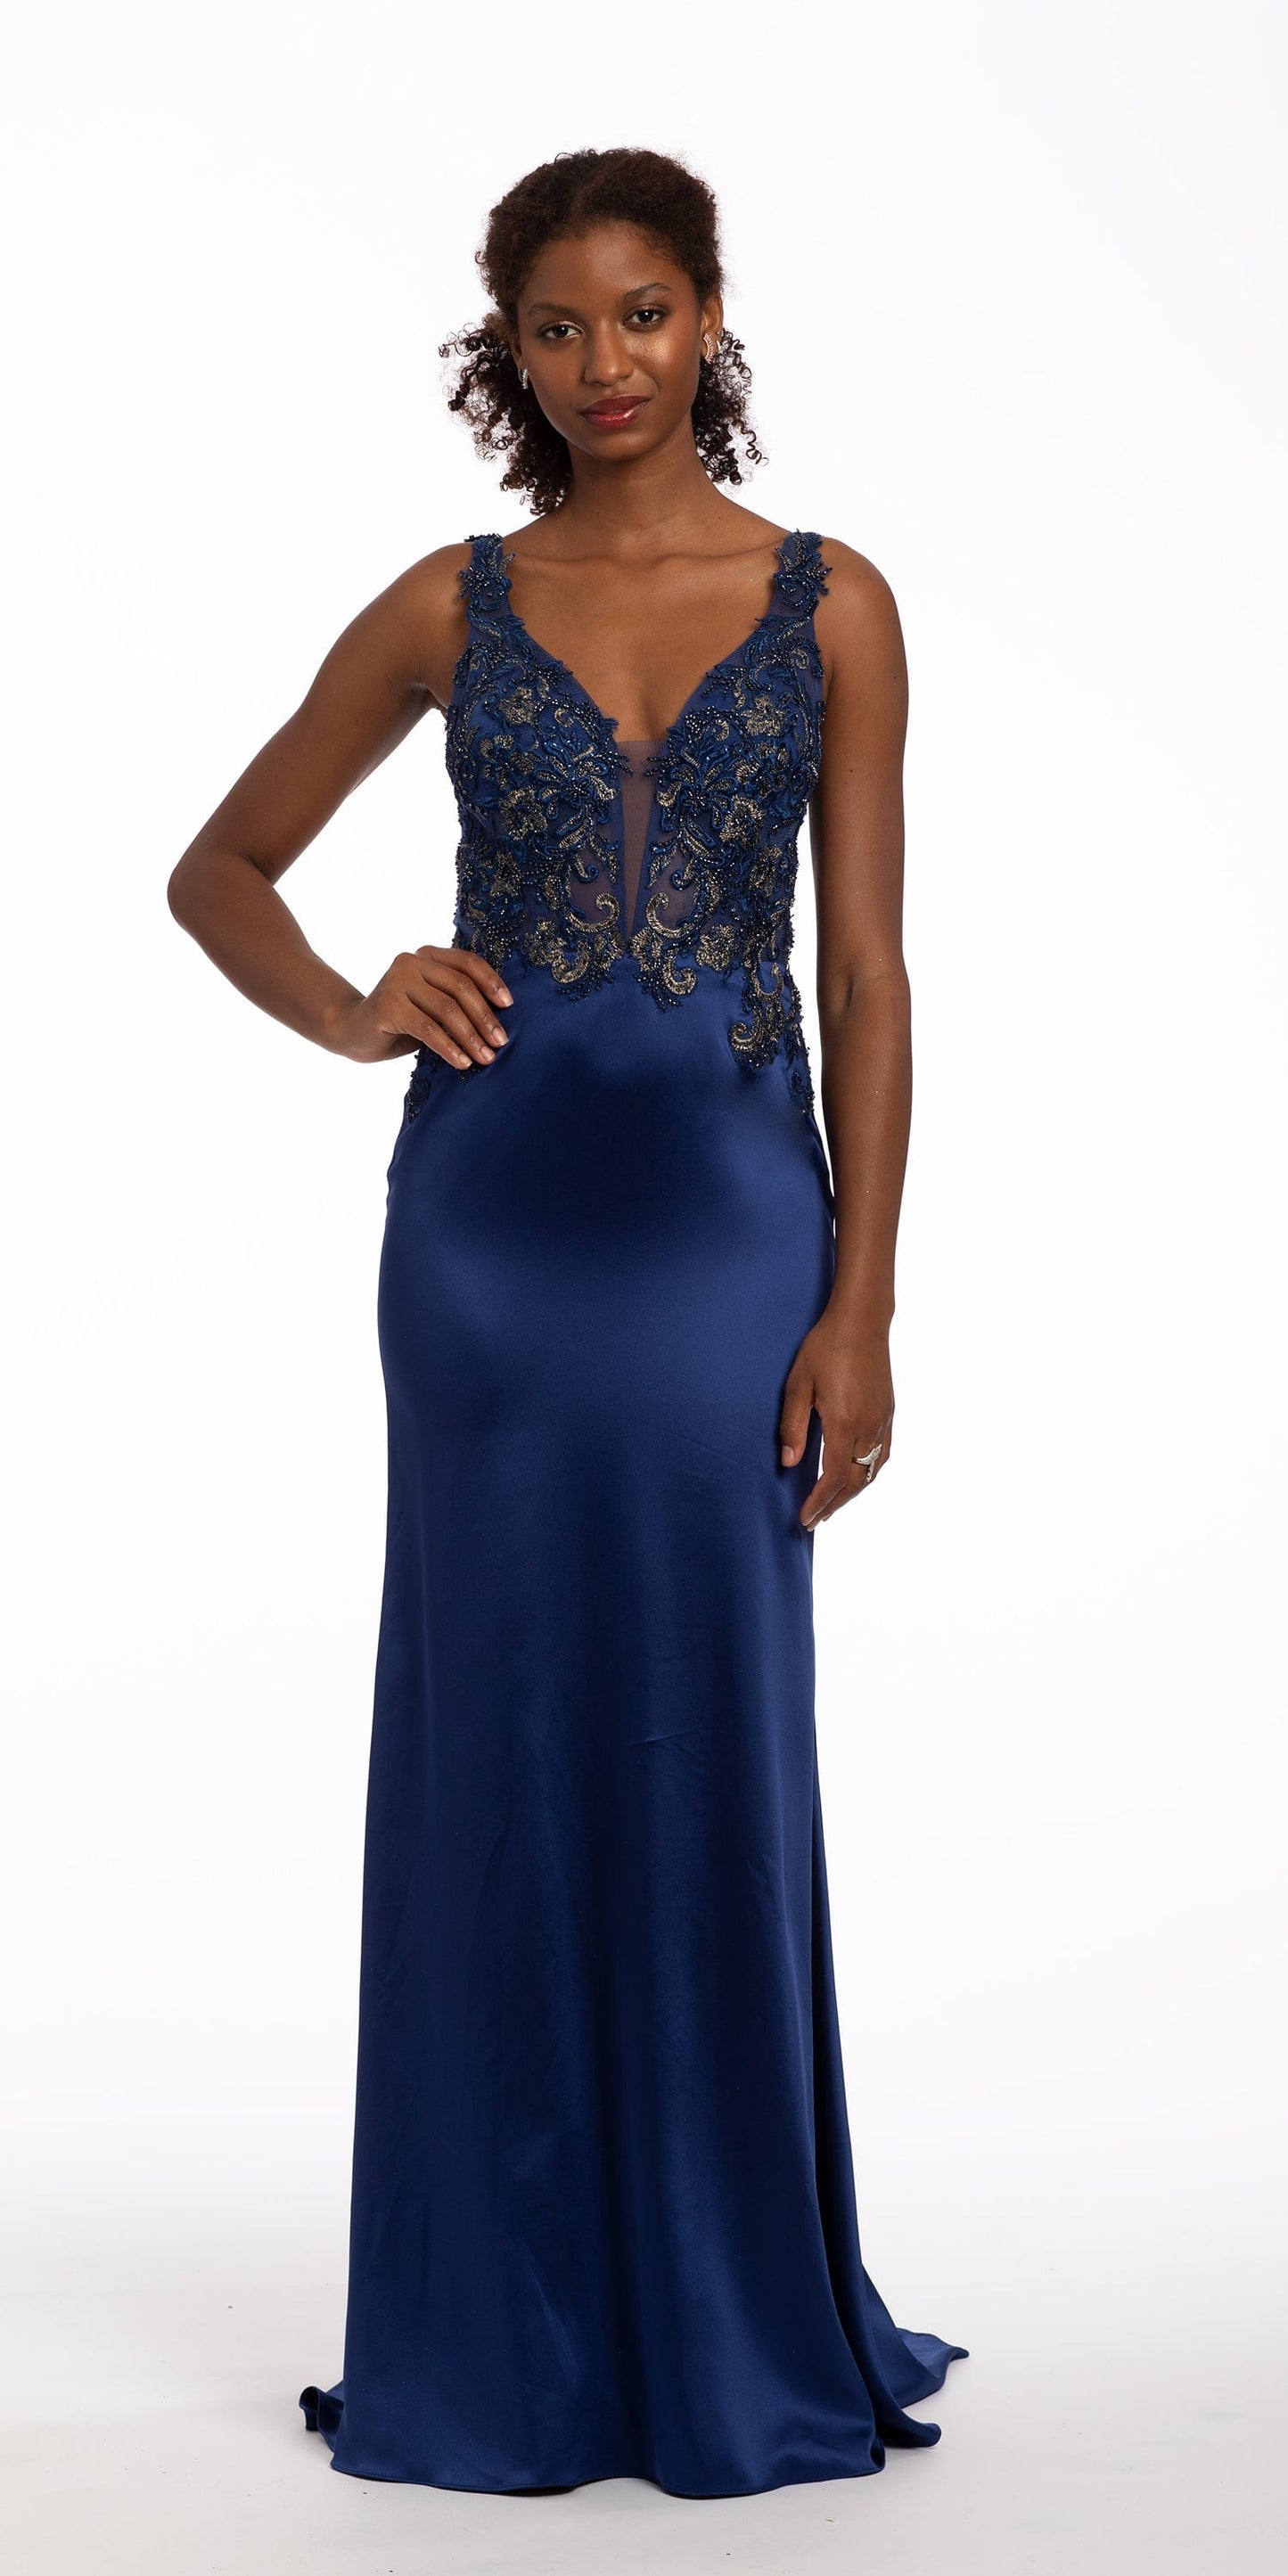 Camille La Vie Beaded Embroidered Plunging Sateen Dress with Train missy / 8 / navy